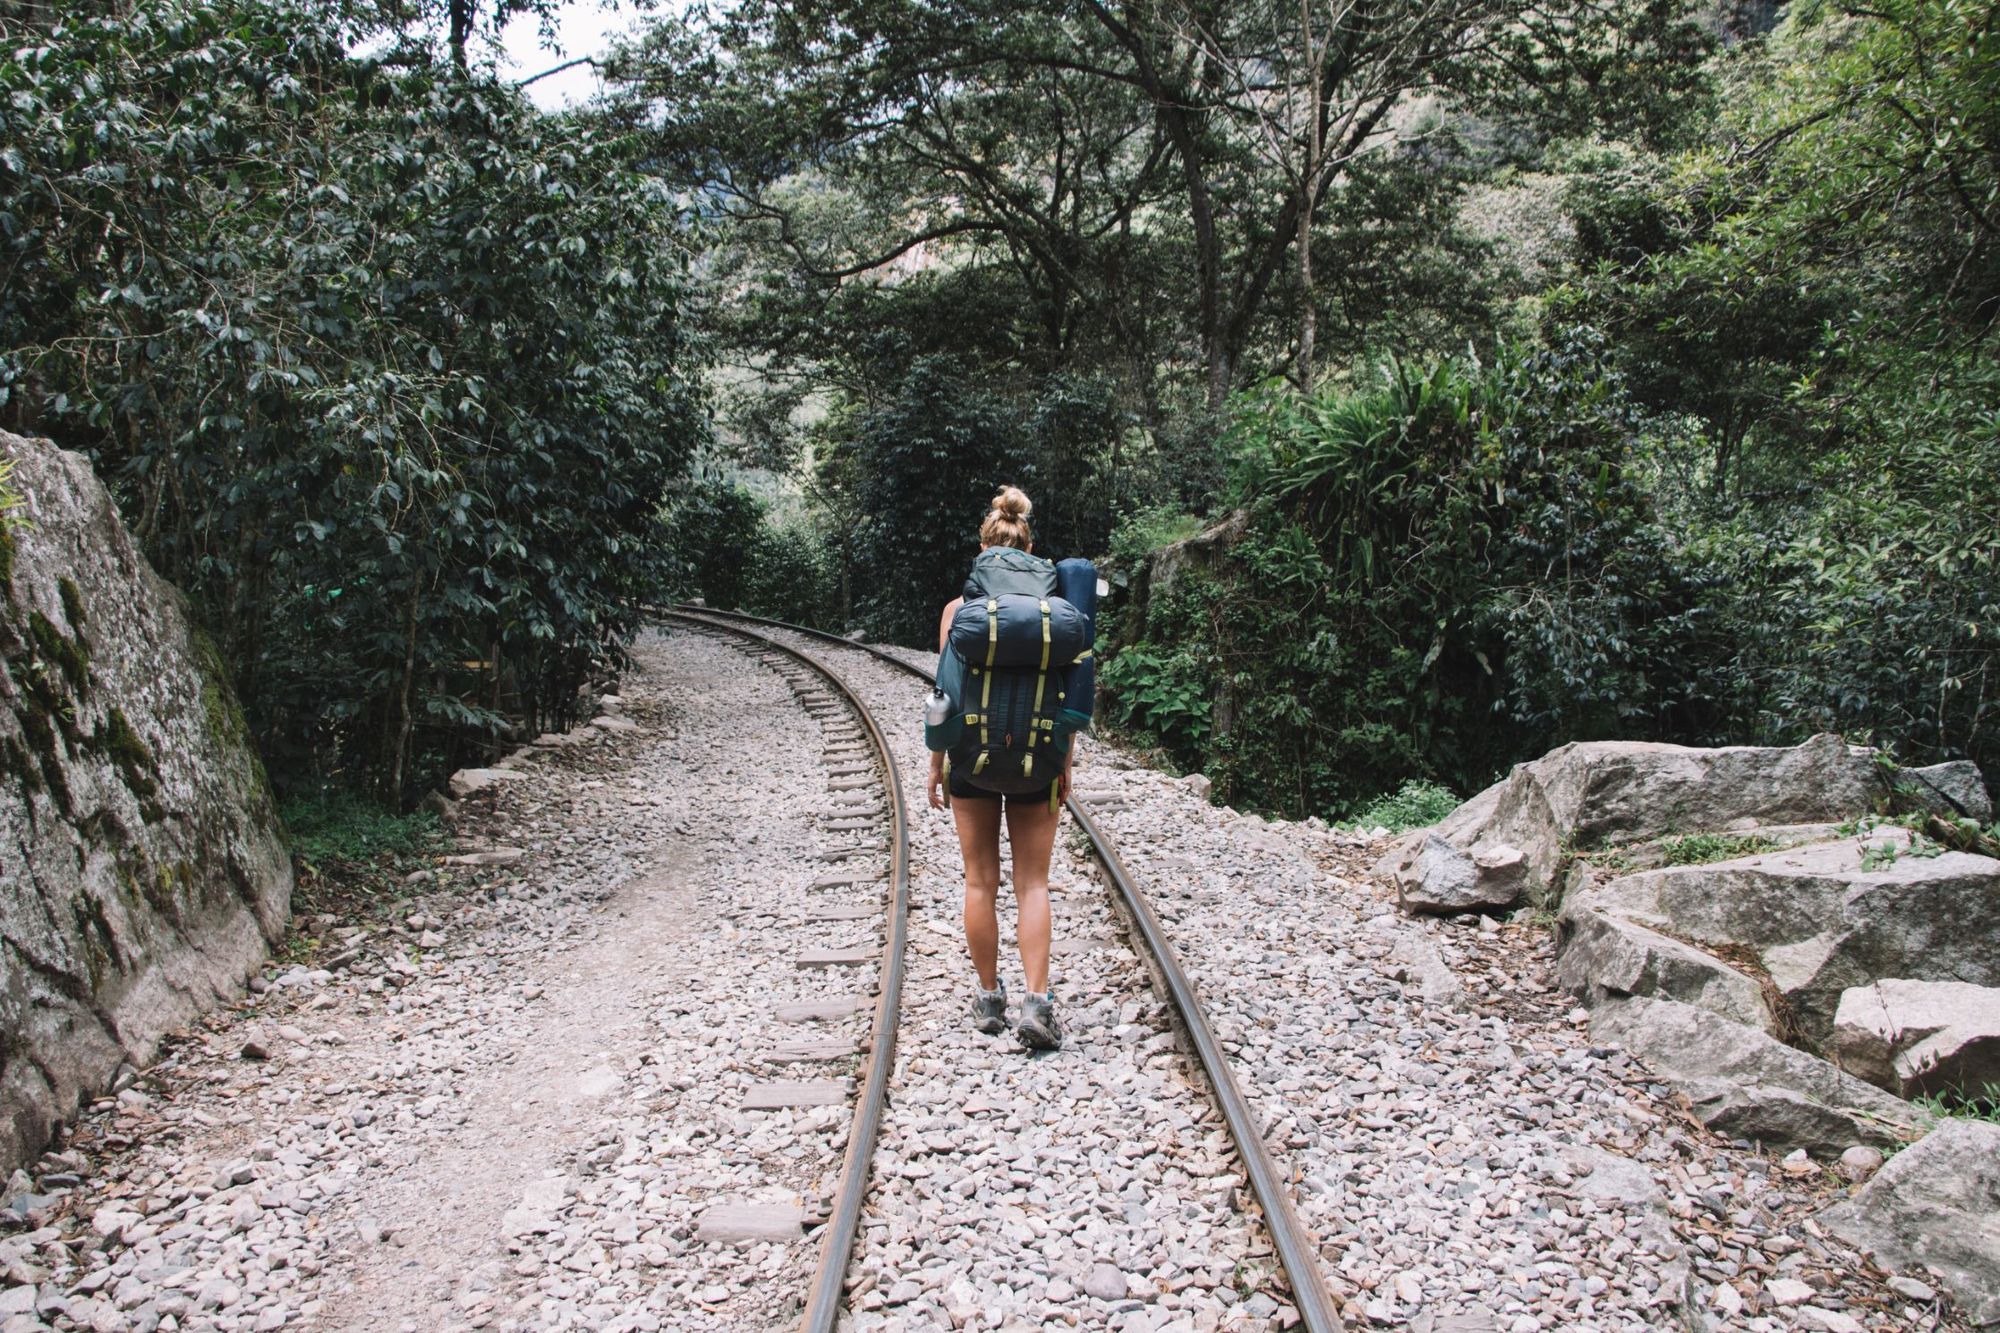 Hiking the final stretch of the route along the railway line to Aguas Calientes. Photo: Getty